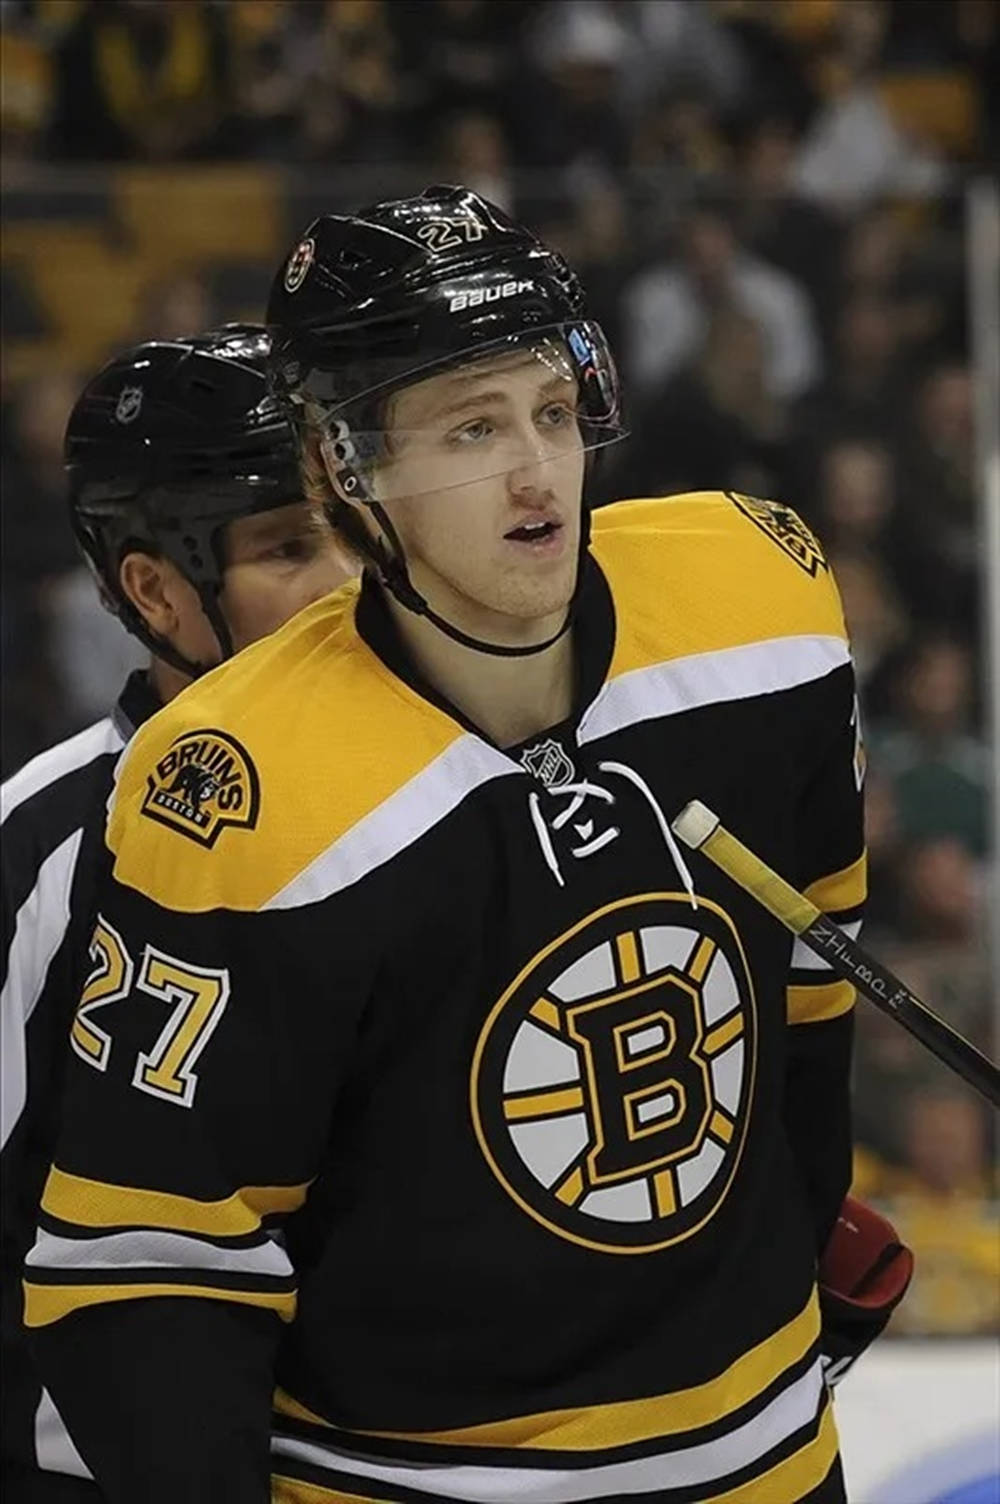 Dougie Hamilton, former star defenceman of Boston Bruins in deep concentration on the ice Wallpaper